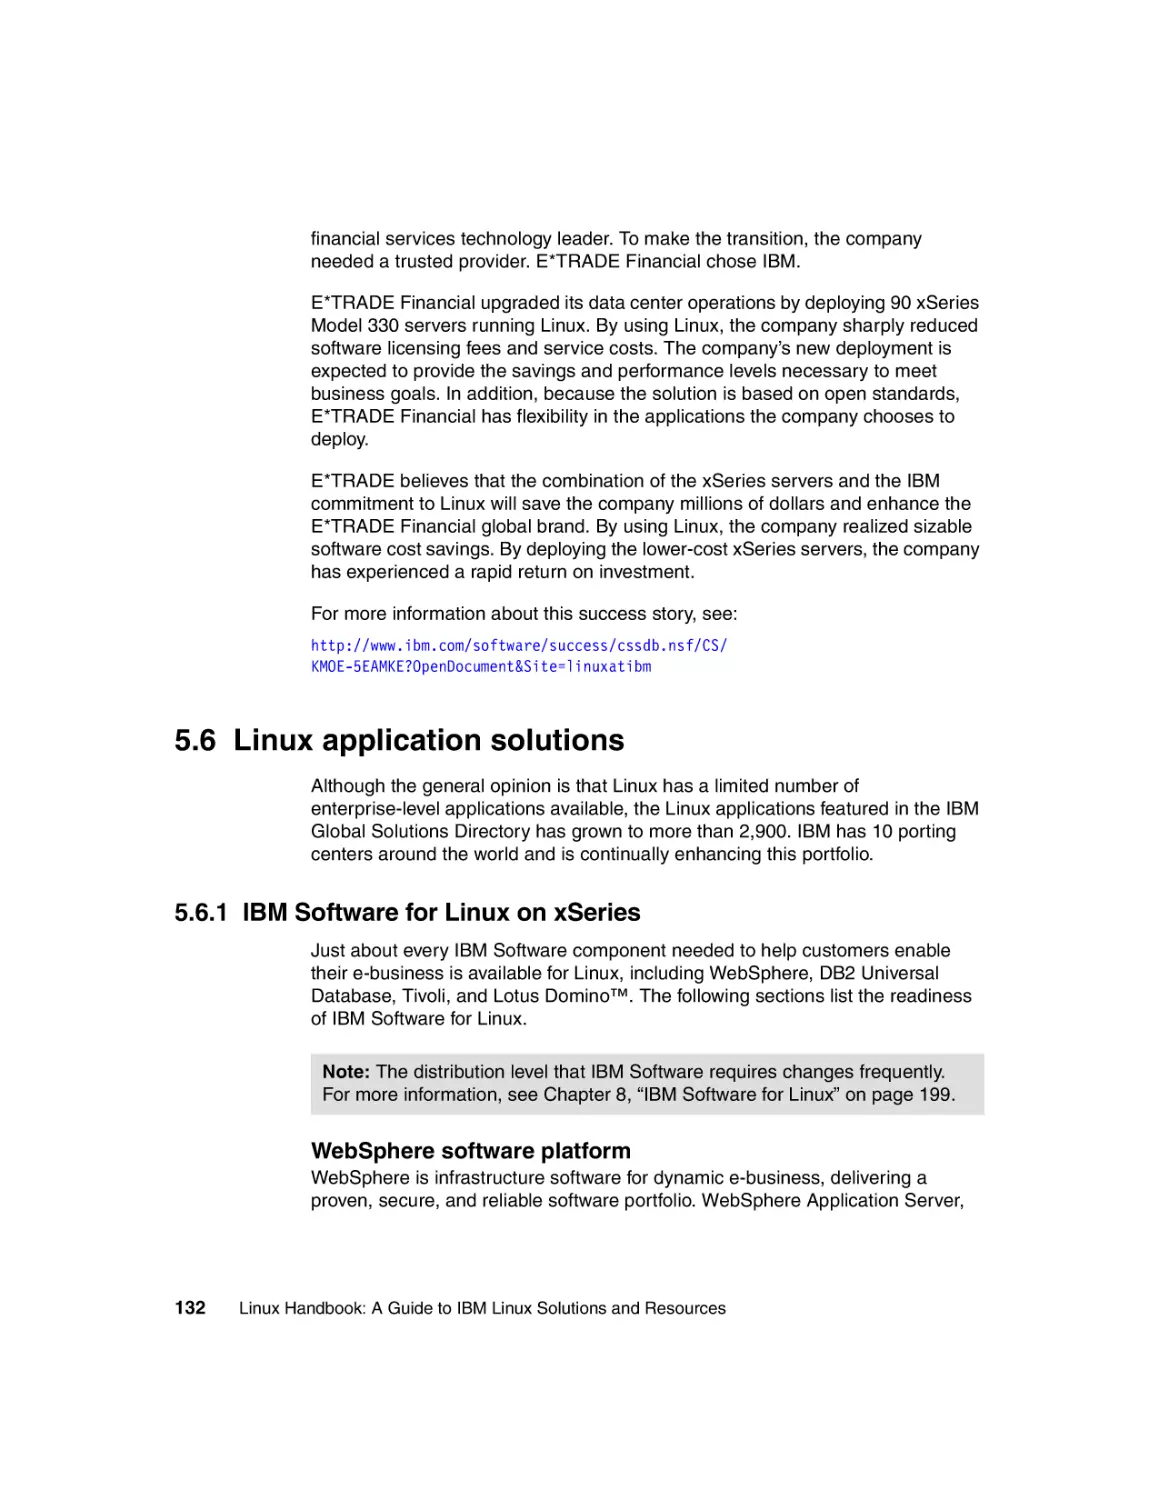 5.6 Linux application solutions
5.6.1 IBM Software for Linux on xSeries